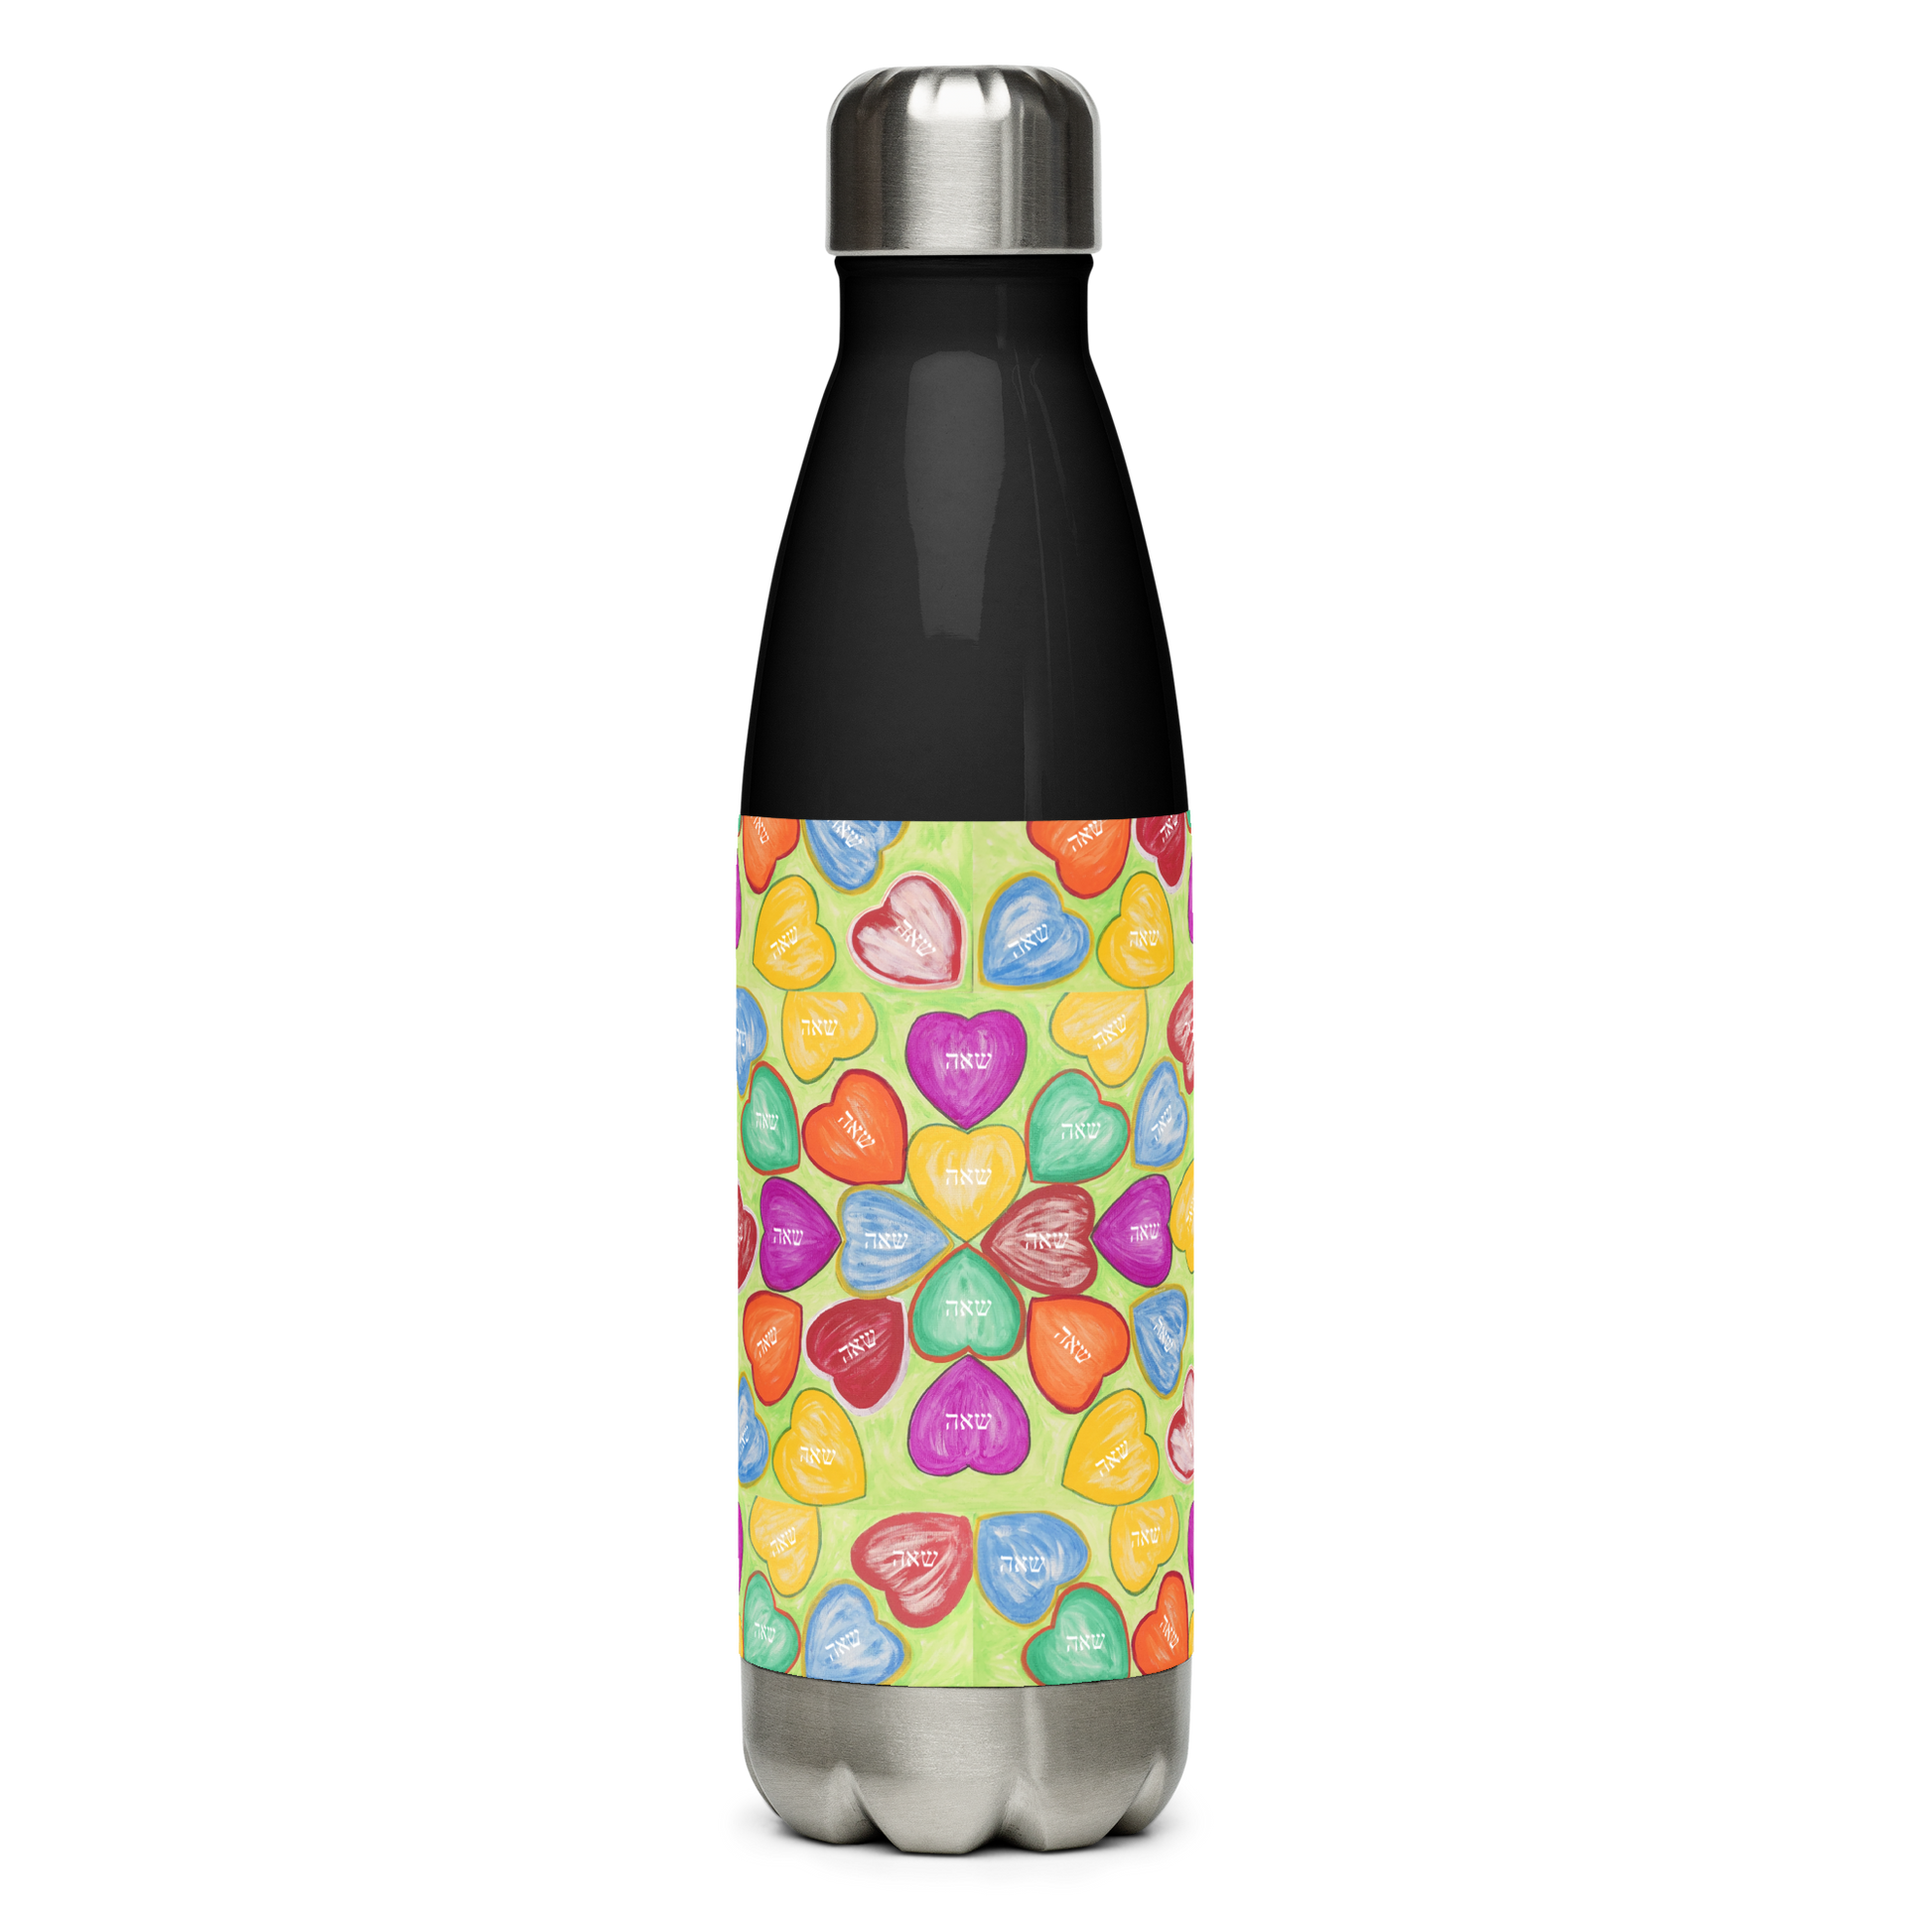 Stainless-Steel-Water-Bottle-17oz-Soulmate-(72-Names-of-God-ShinAleph-Yud)-1-137online.com